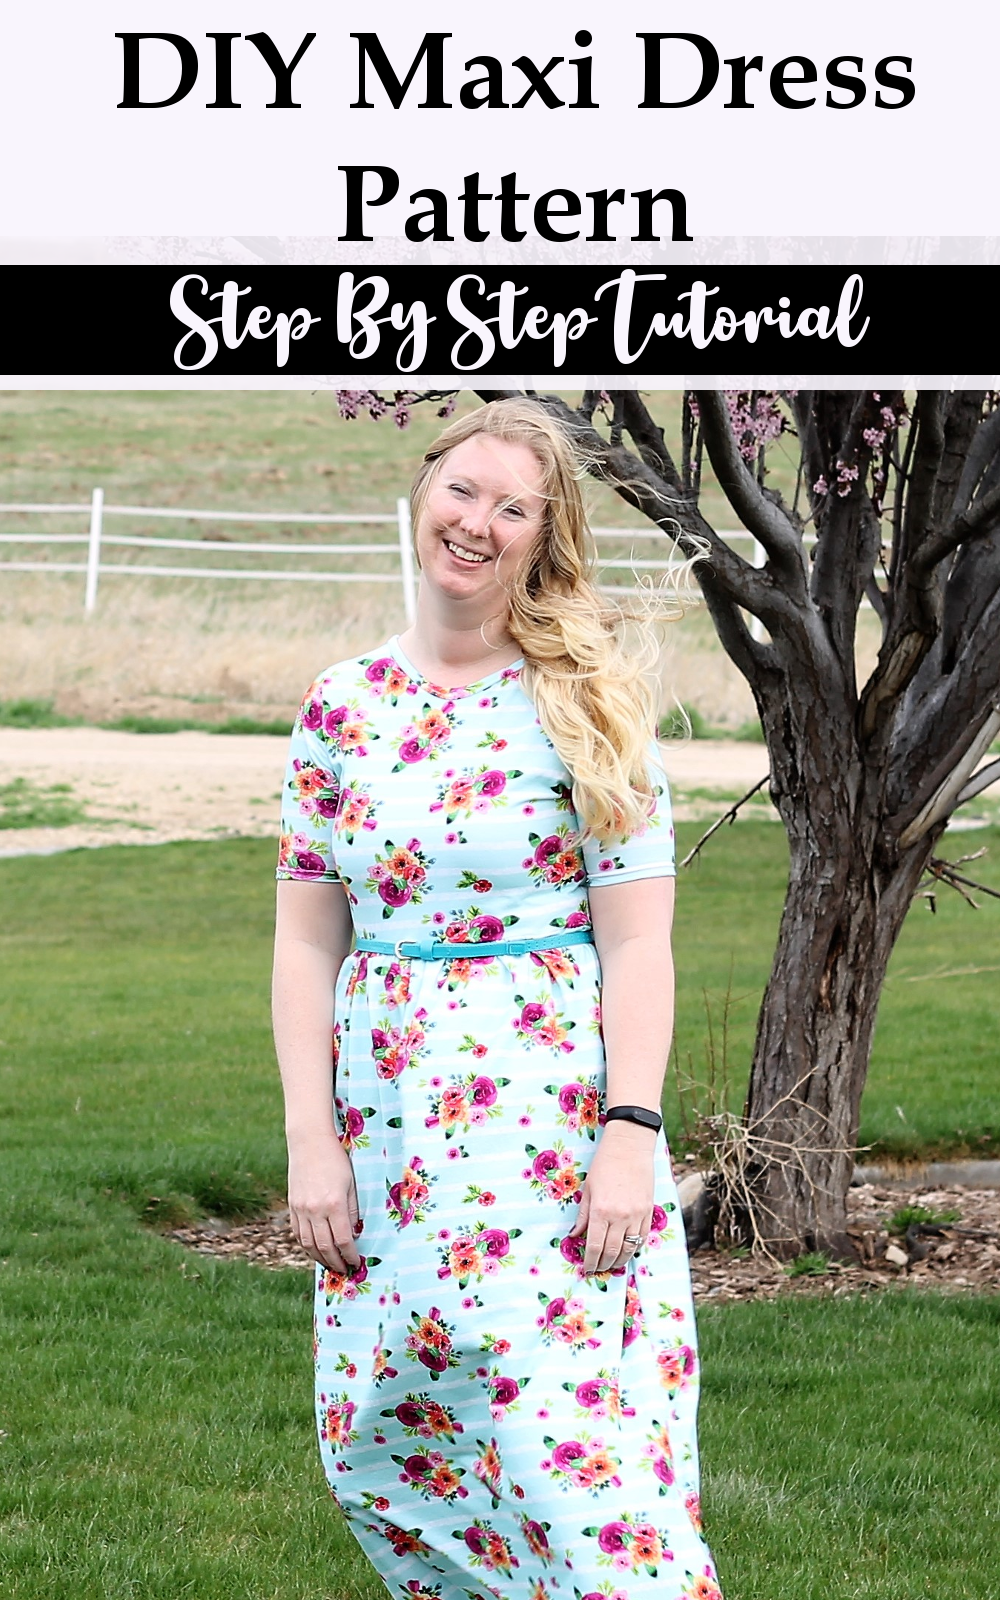 Sew Your Own Woman's Maxi Dress Tutorial | Sew Simple Home